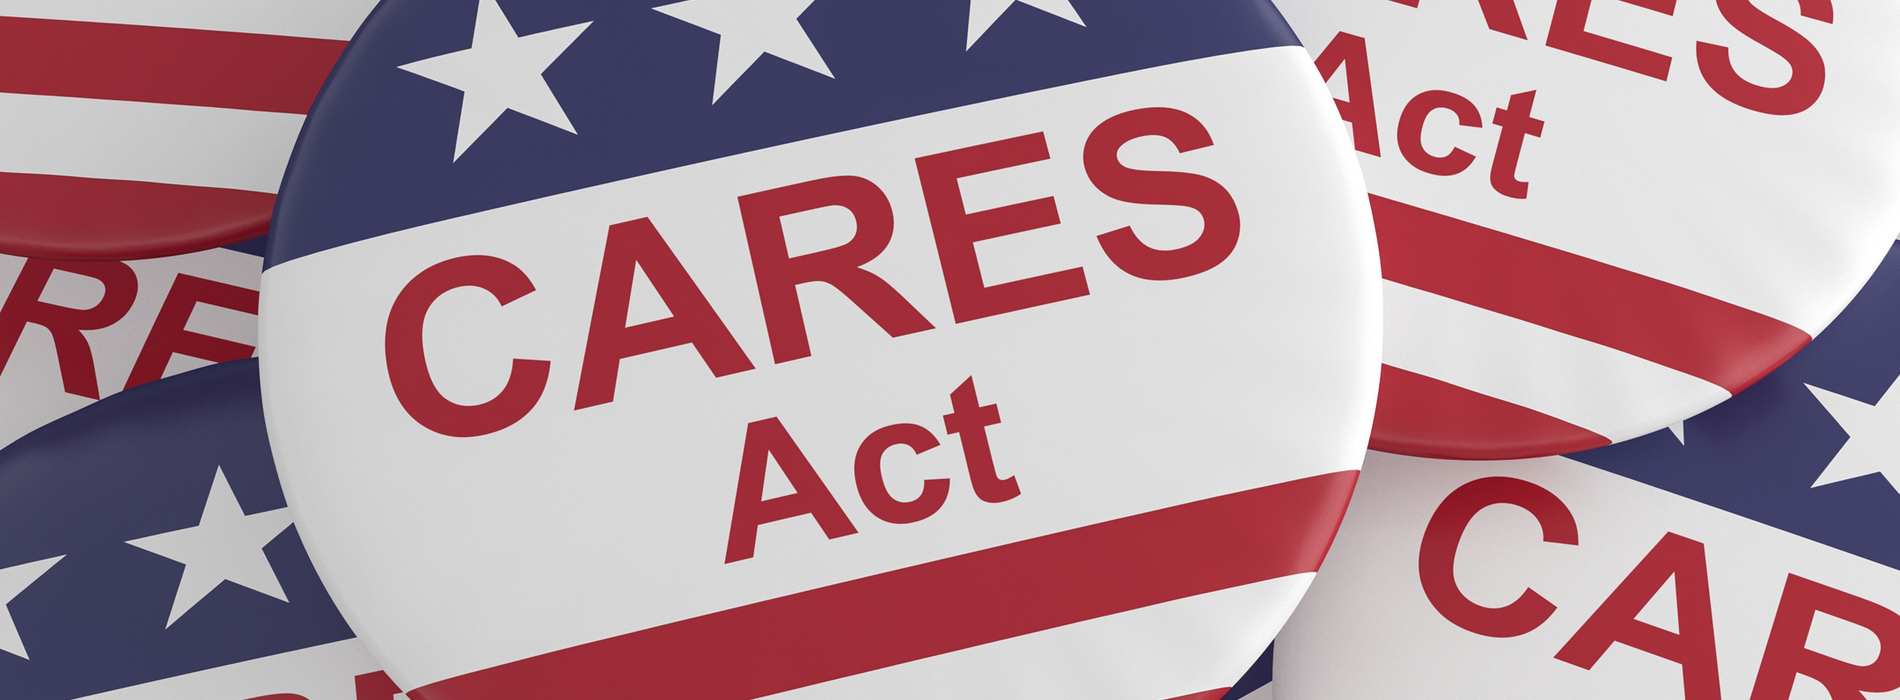 Cares Act and Secure Act